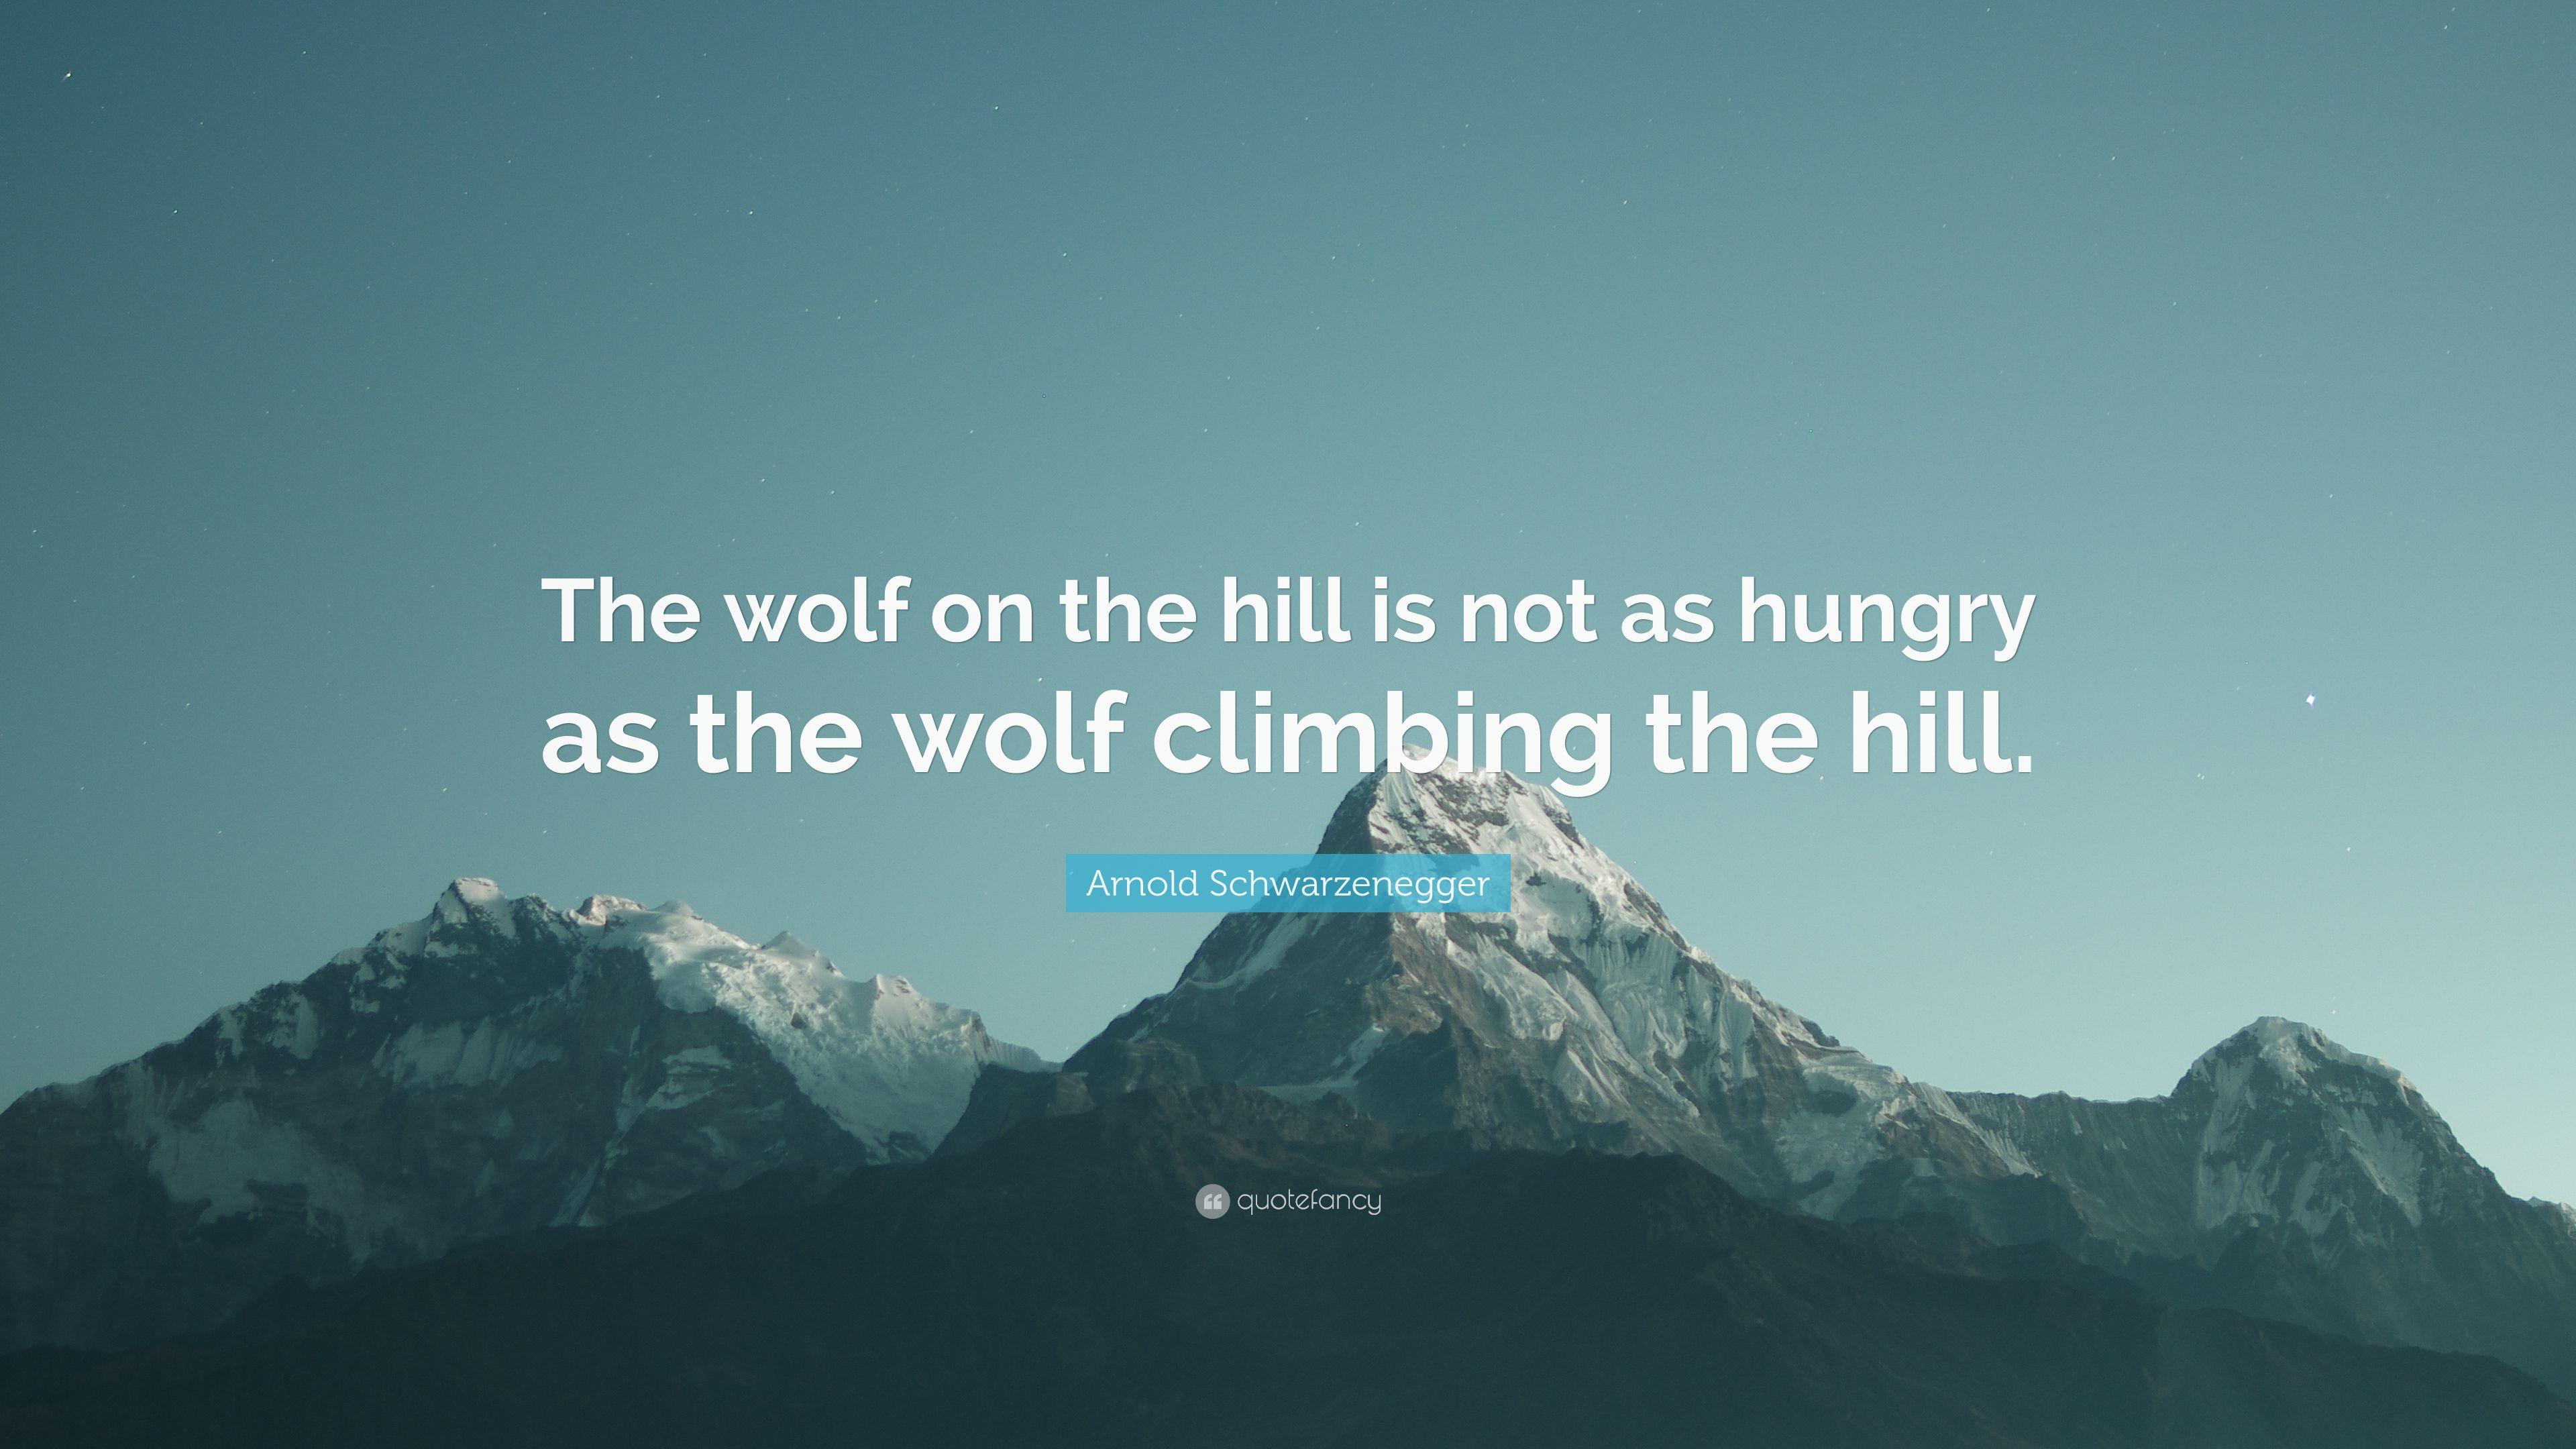 Arnold Schwarzenegger Quote: “The wolf on the hill is not as hungry